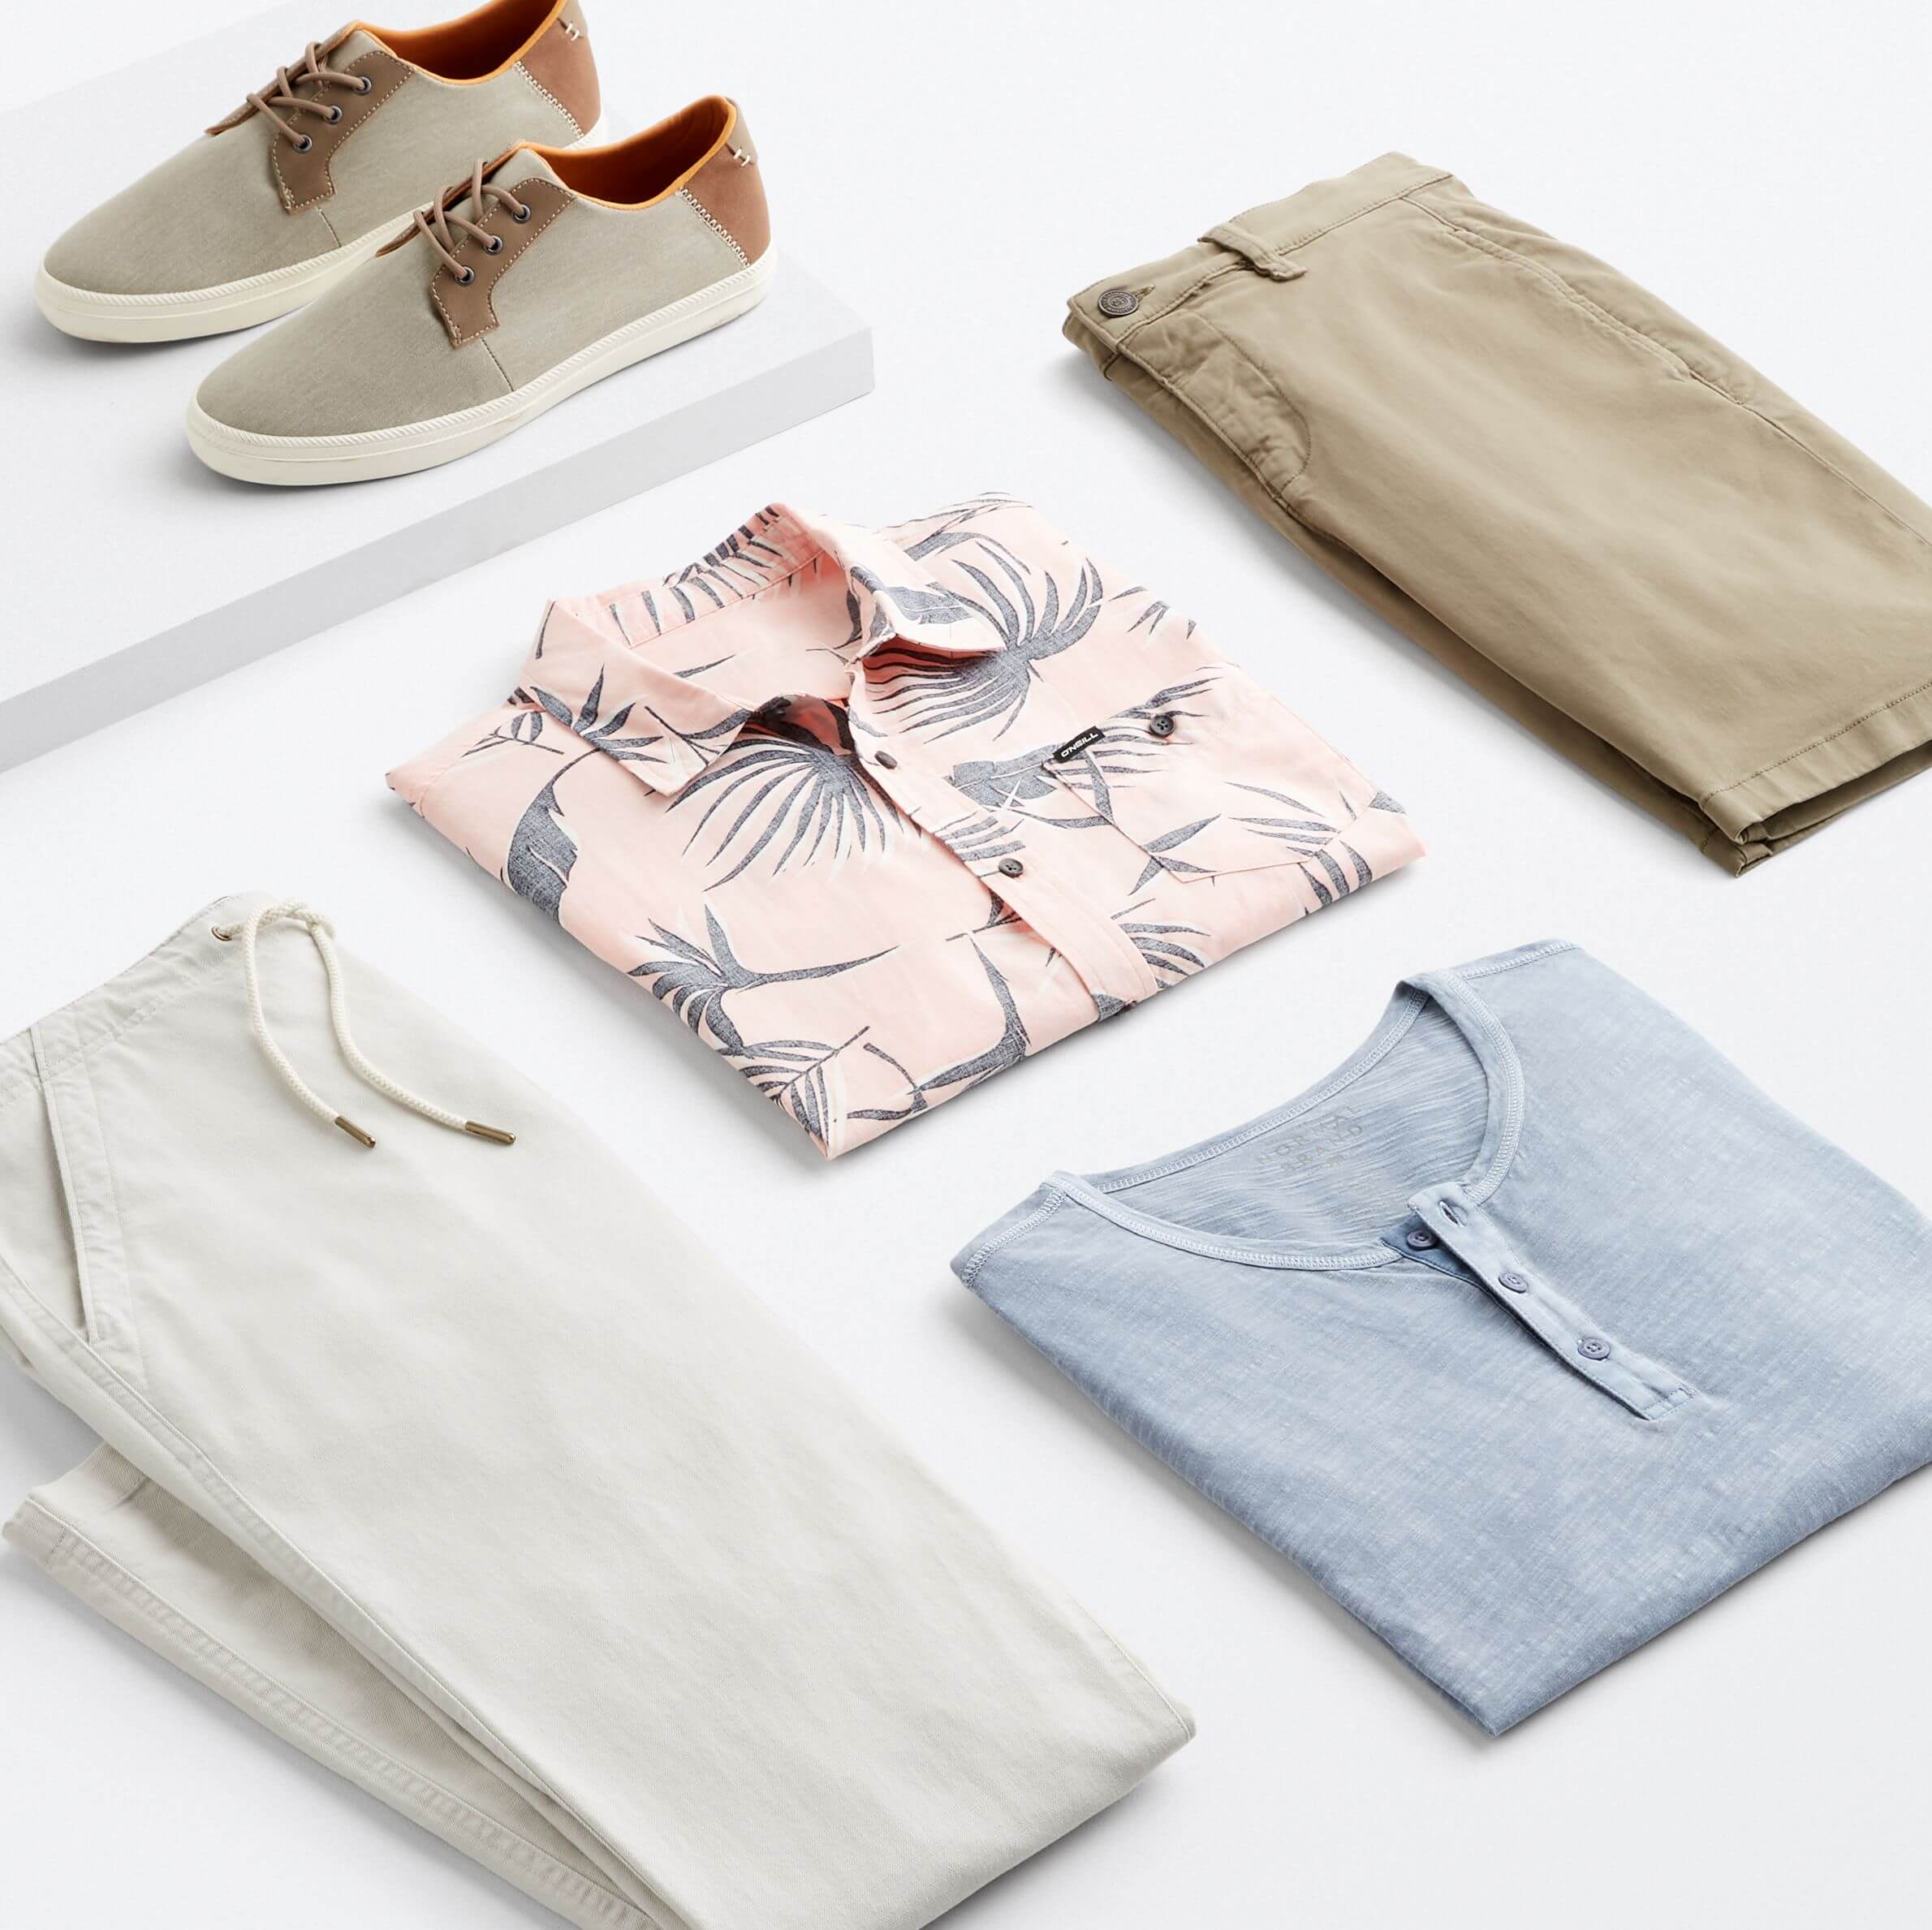 The Best Pants, Shorts & Jeans For Men to Wear In Summer